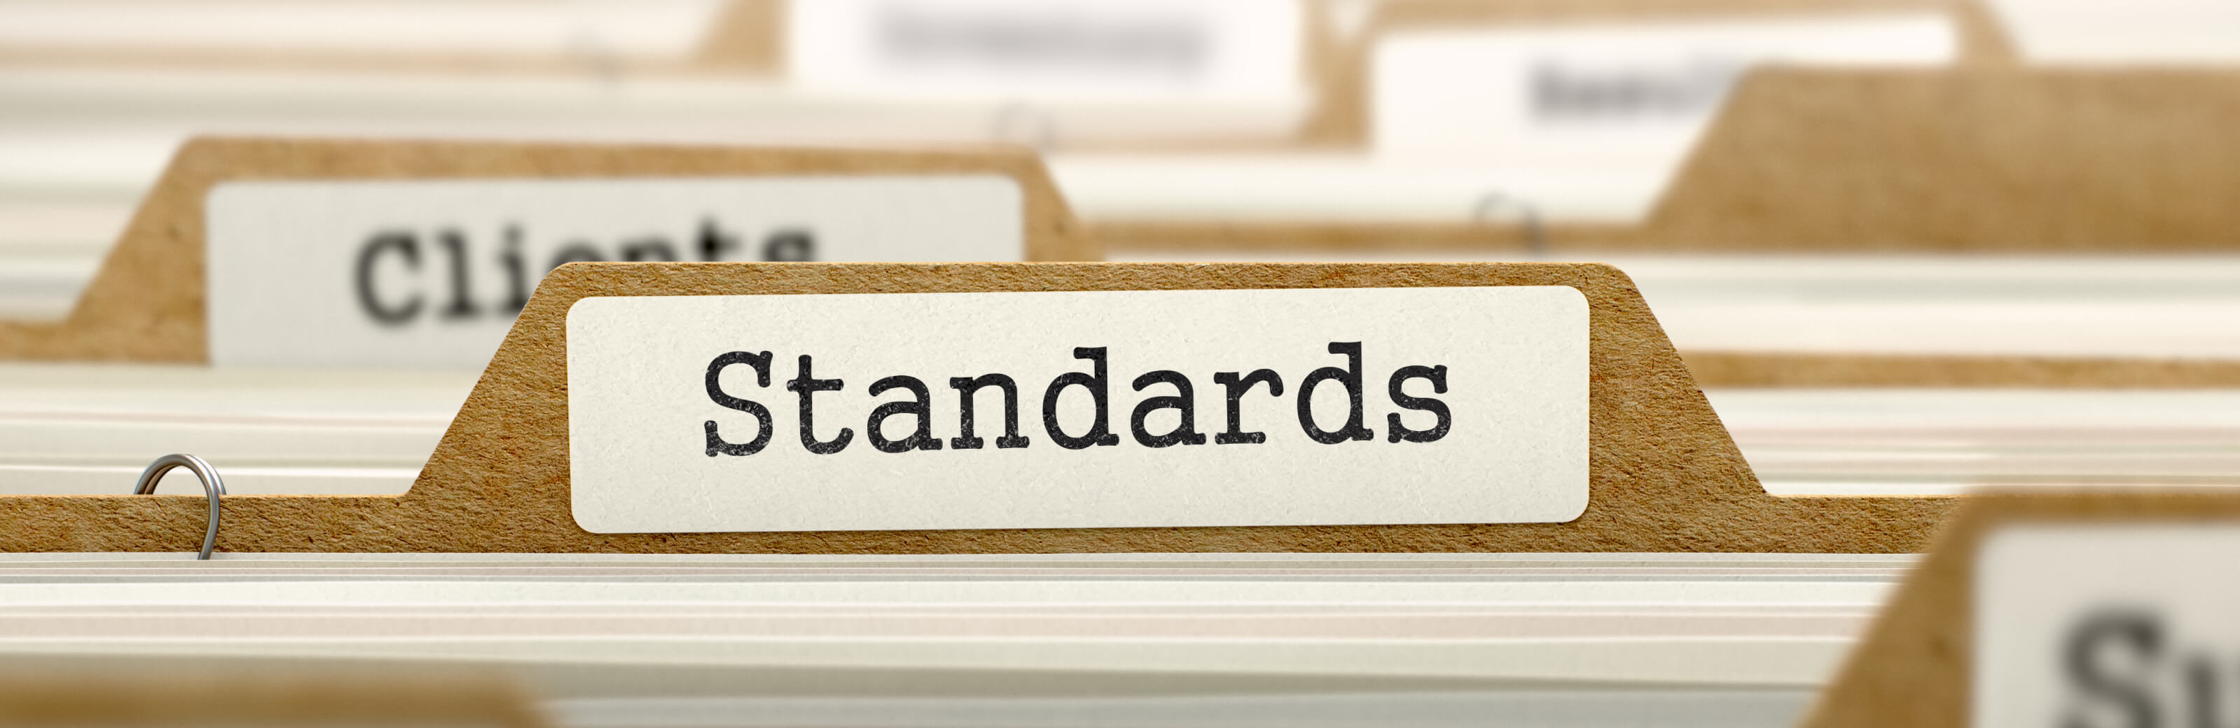 Understanding Harmonized Standards for medical devices and IVDs